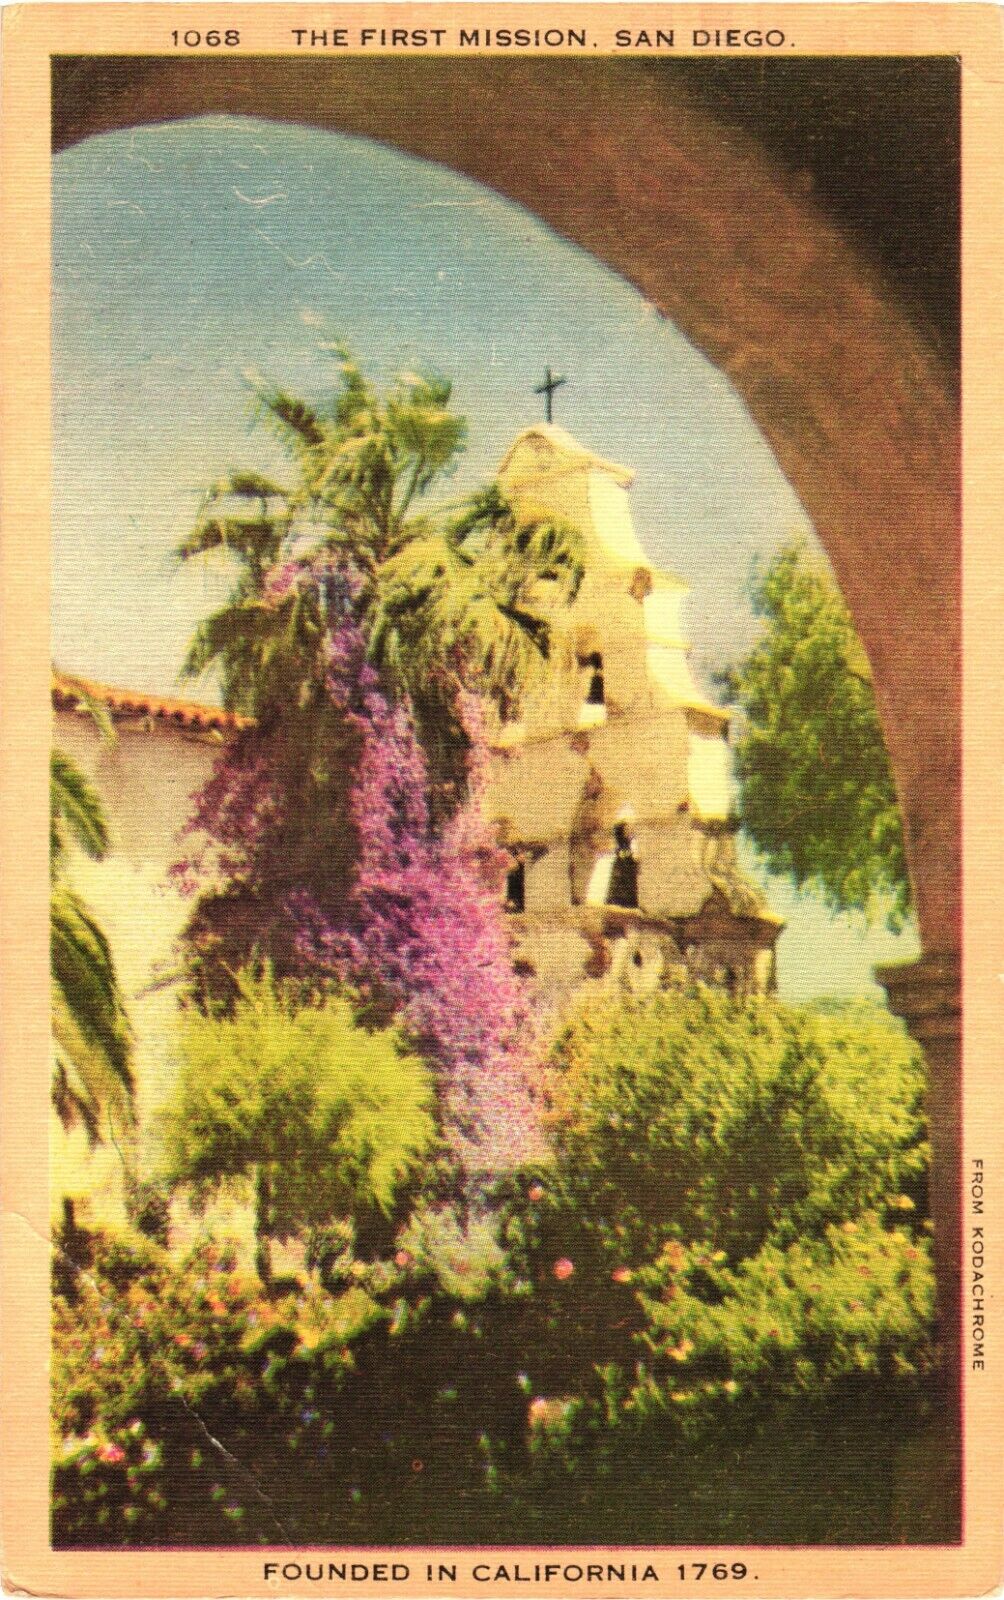 View Of The First Mission, San Diego, Founded In California, 1769 Postcard